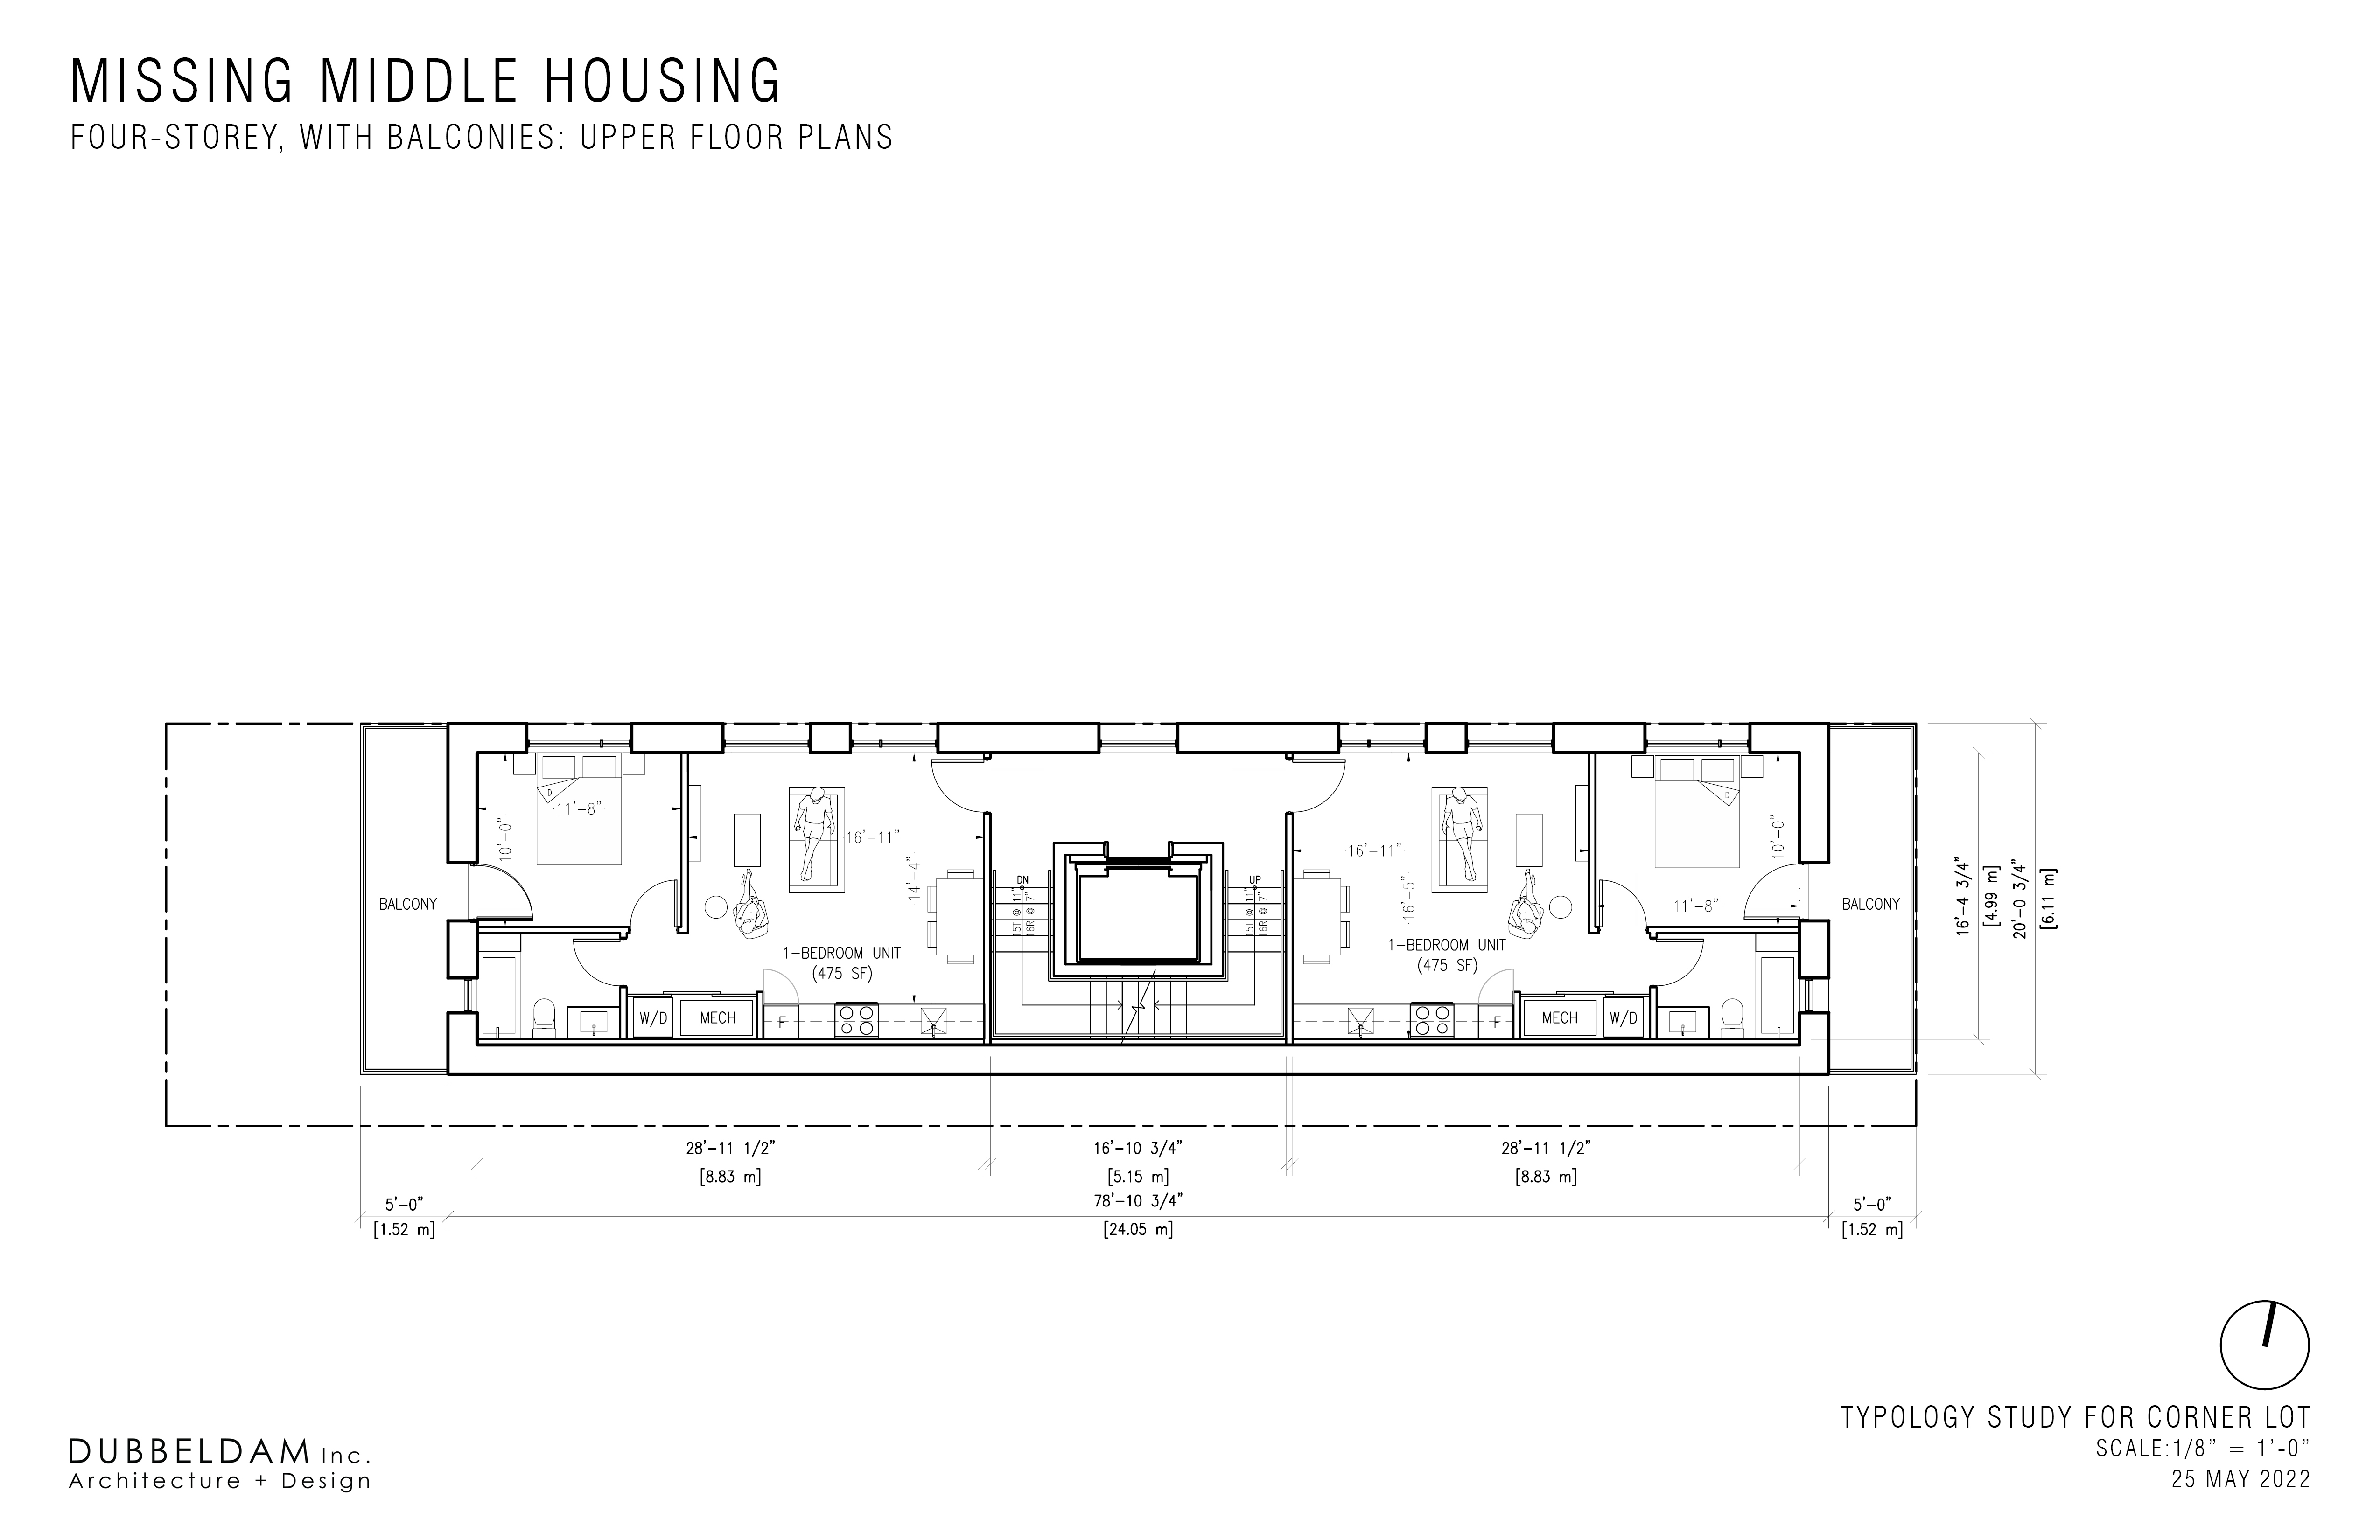 Upper storey floor plan of a 4-storey missing middle development with a single stair and balconies. Layout allows for living and dining space with a single bedroom and bathroom and laundry access within each unit